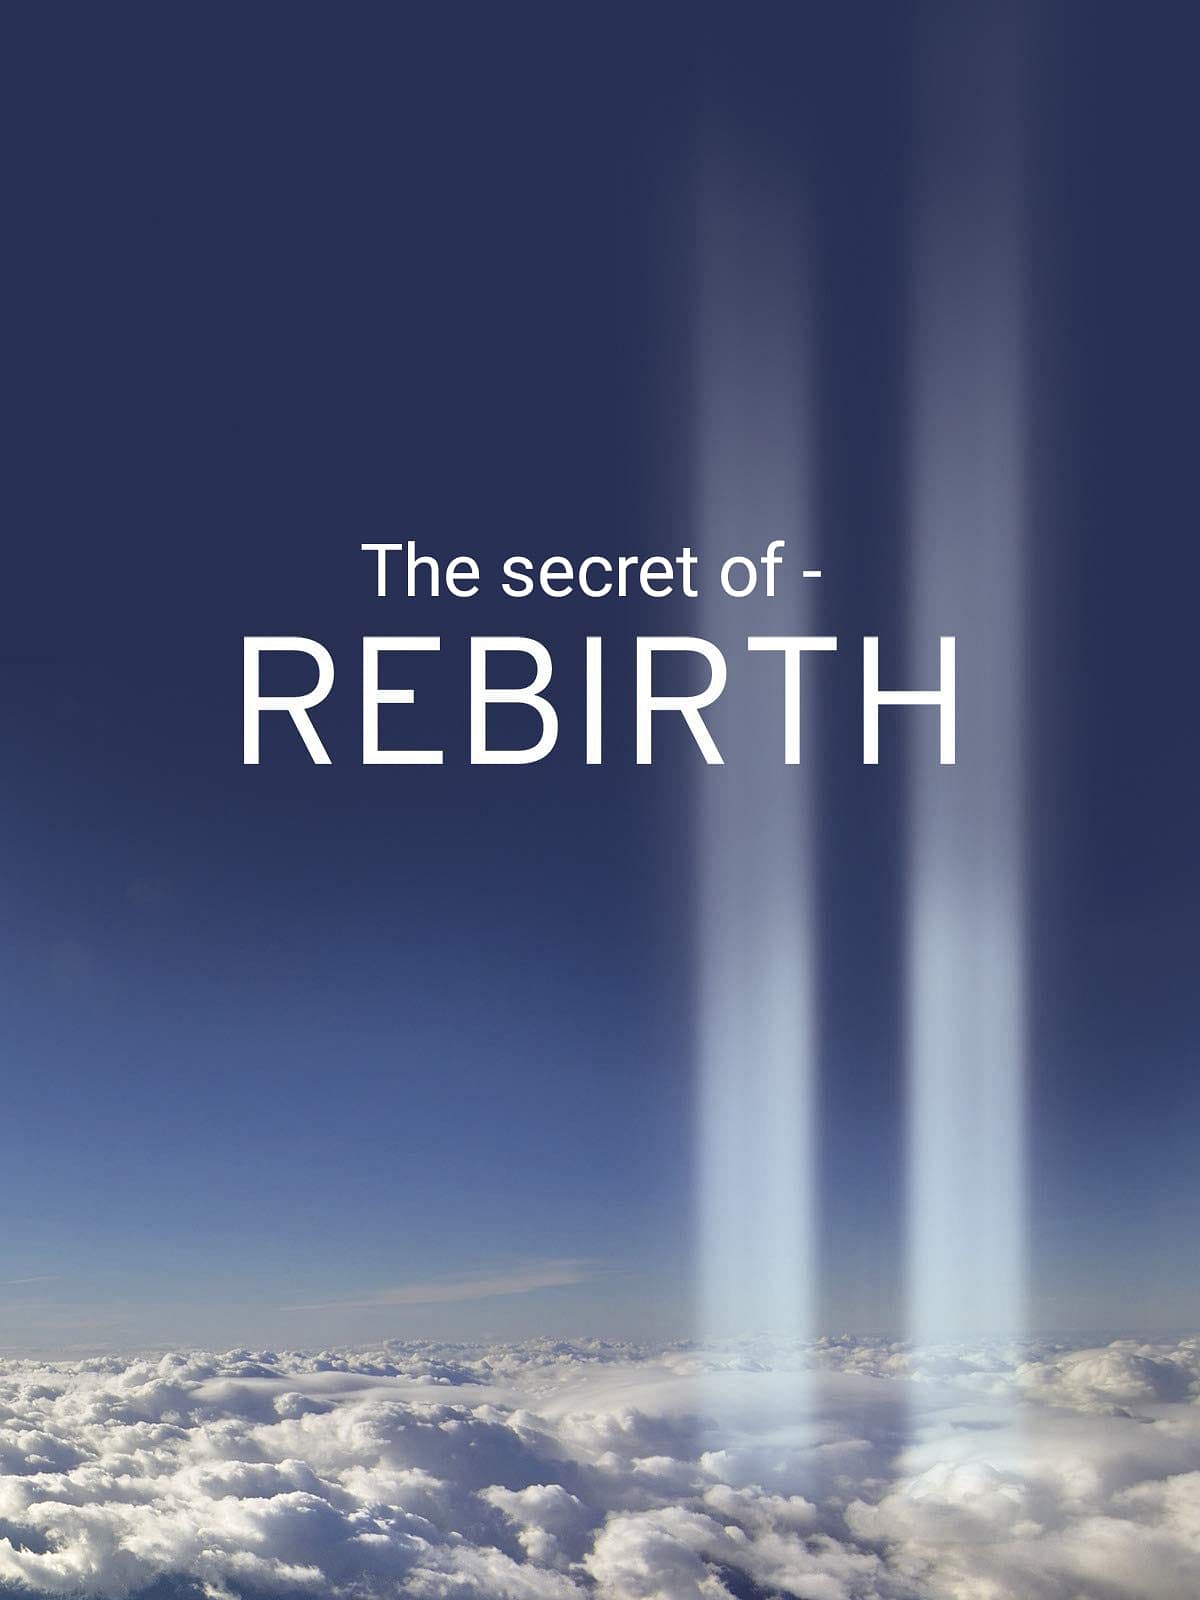 The secret of Rebirth - Know your rebirth Yoni after Death